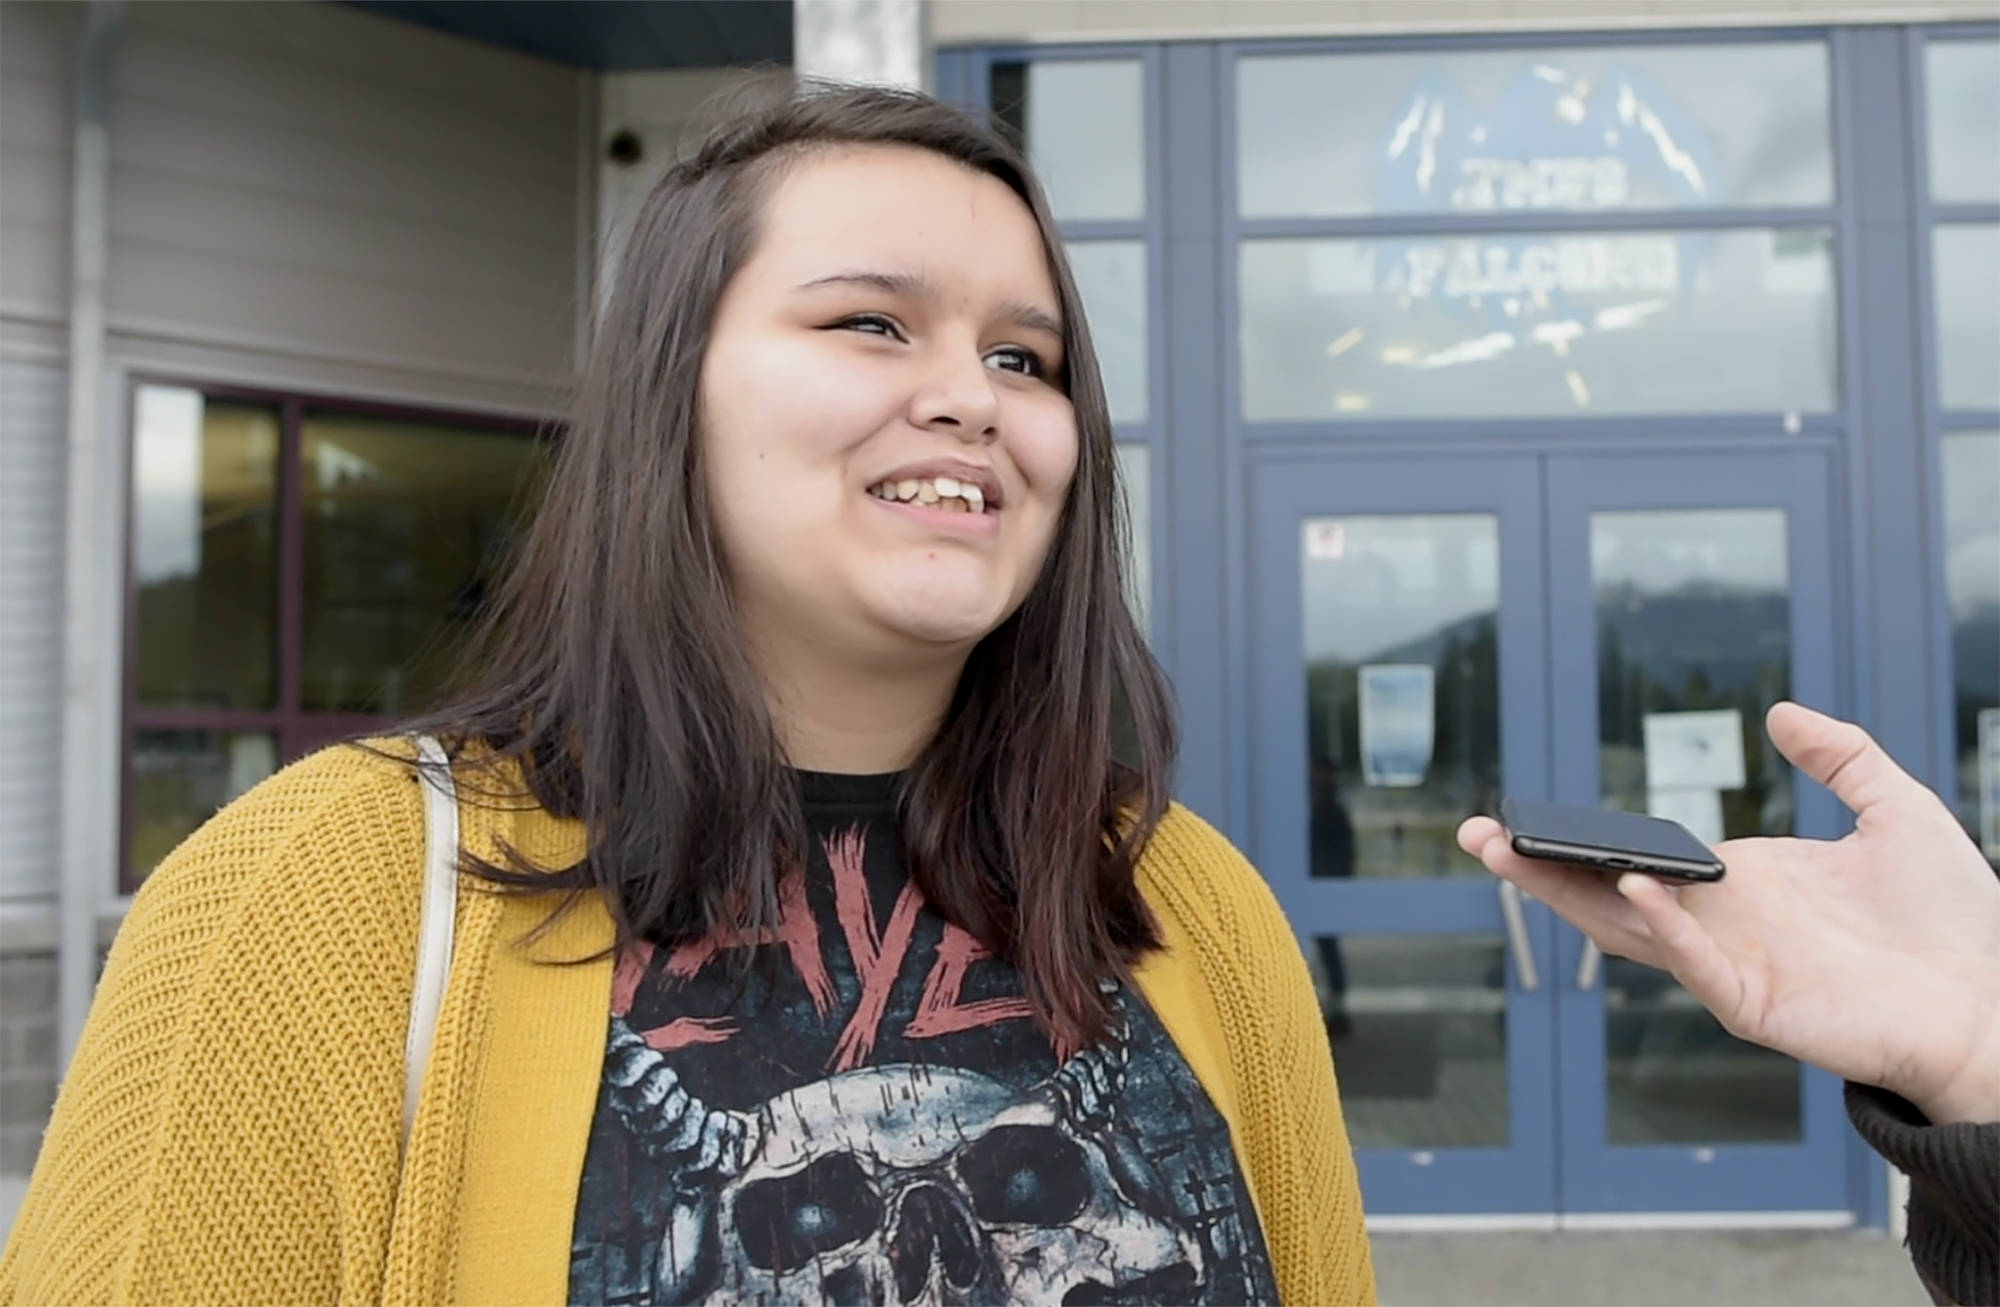 Thunder Mountain High School student Adrianna D’Cafango talks about receiving a $20,000 award from the Juneau Empire during a scholarship awards breakfast at TMHS on Thursday, May 24, 2018. (Michael Penn | Juneau Empire)